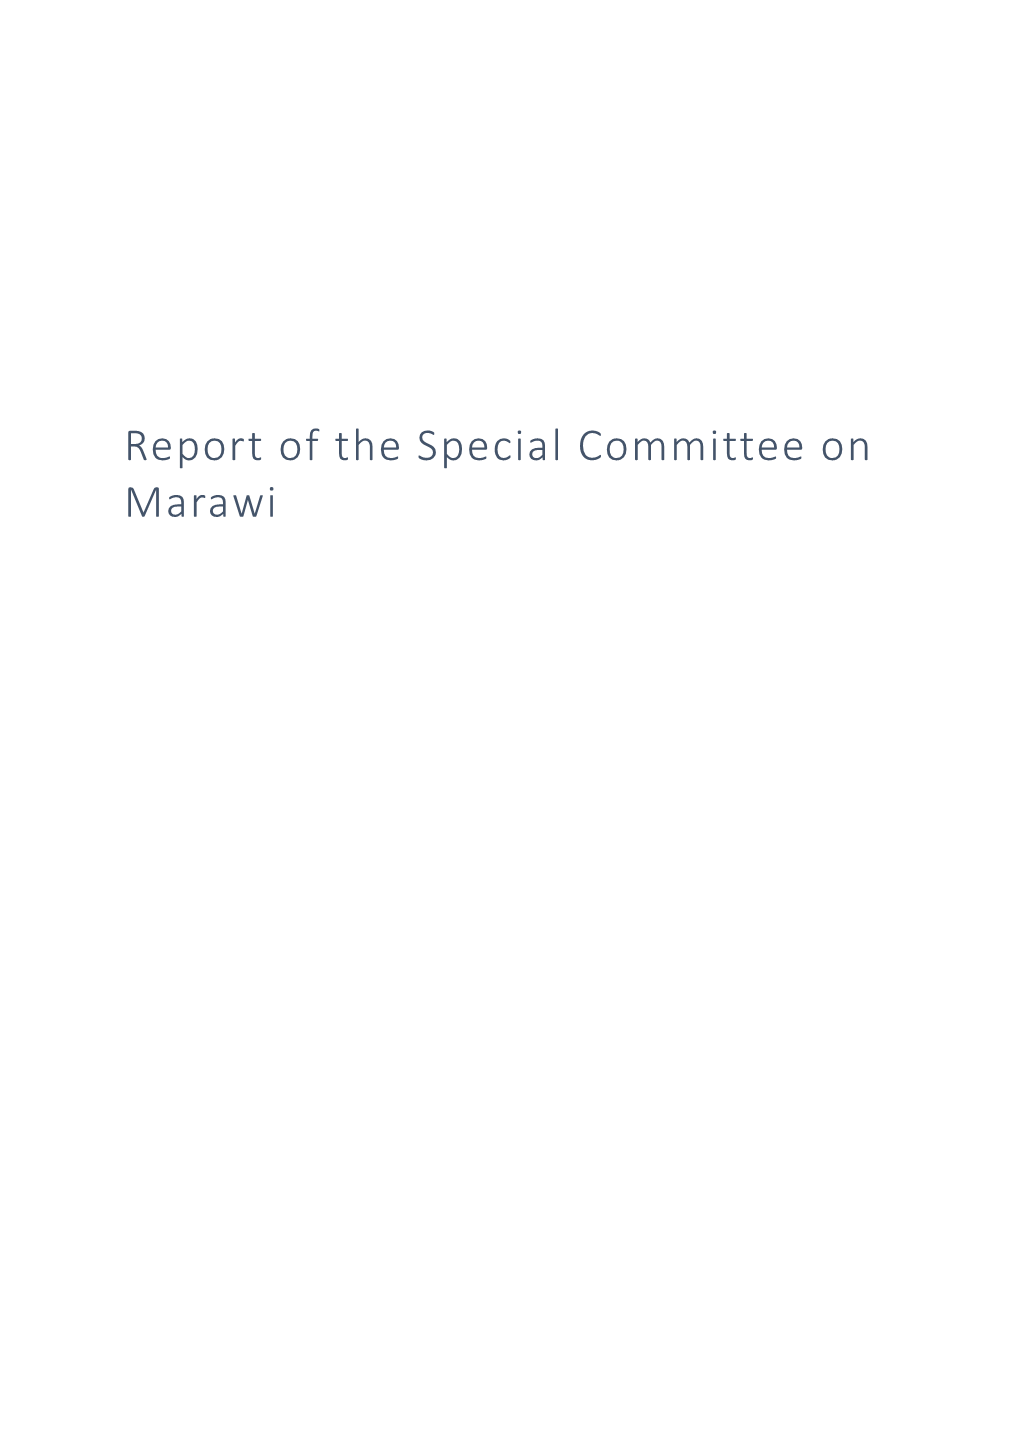 Report of the Special Committee on Marawi